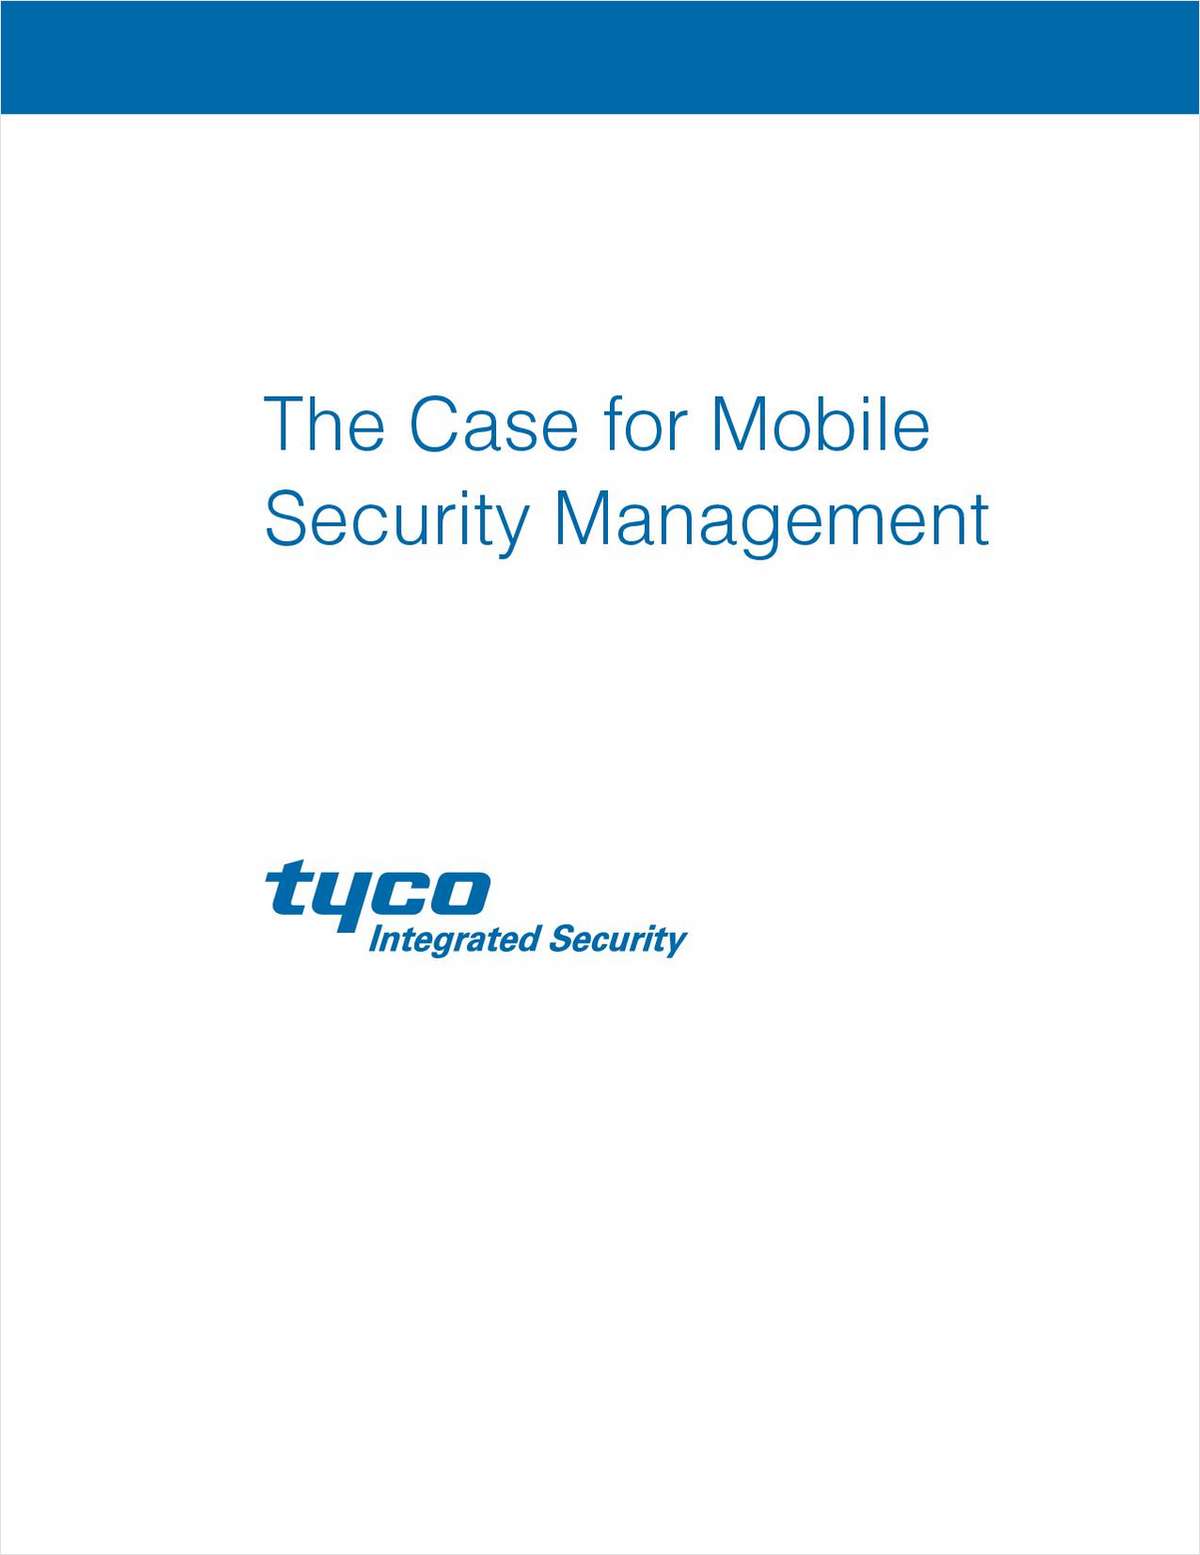 The Case for Mobile Security Management